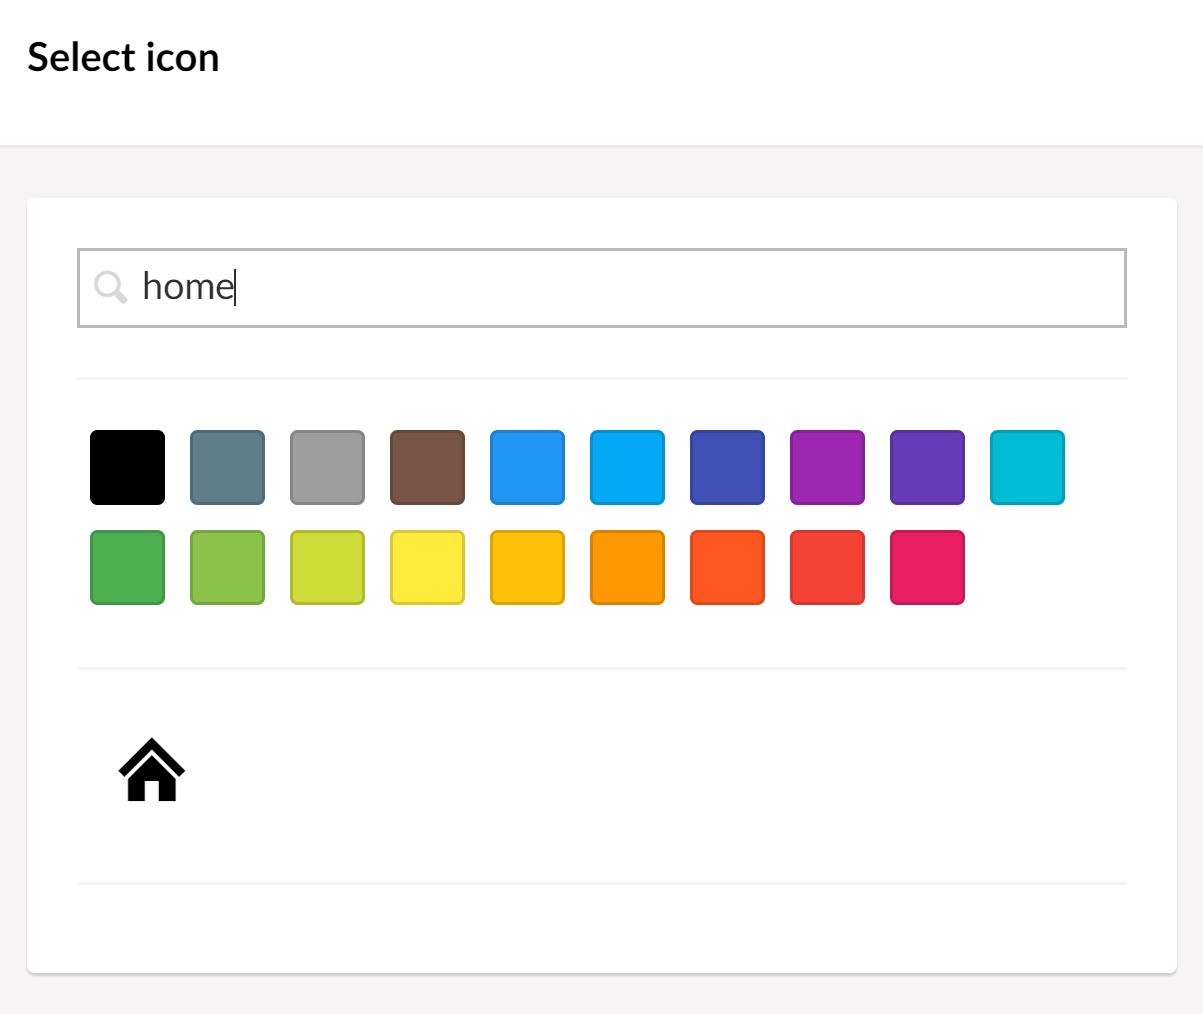 Choosing an icon for the Document Type